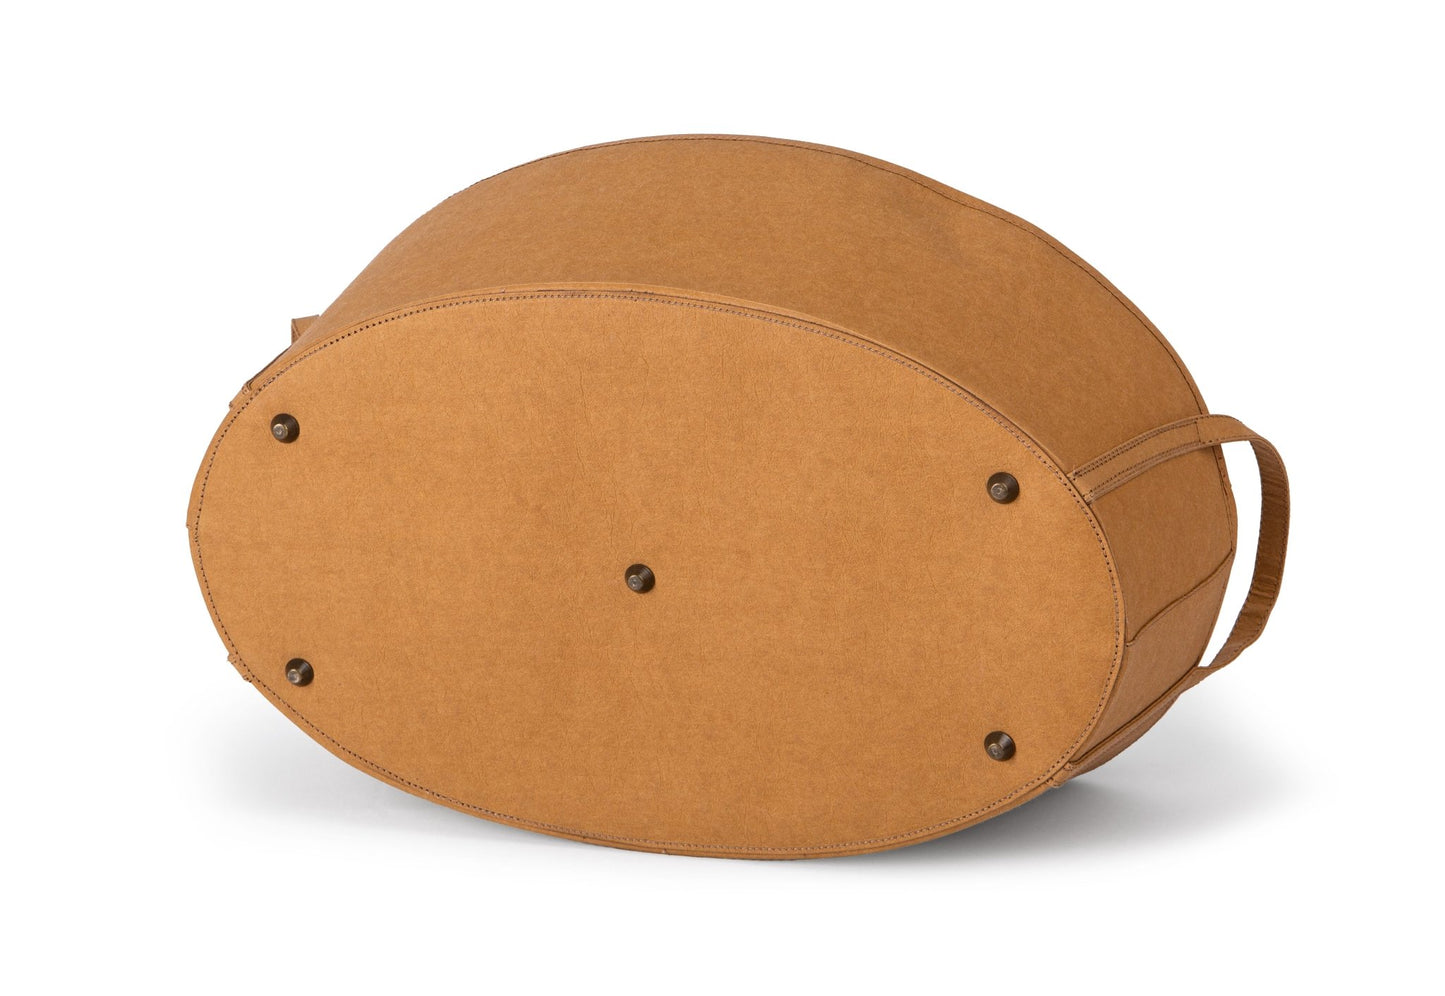 A rounded oblong storage box in tan coloured washable paper is shown from the bottom angle. it features two side handles and metal studs on the bottom for protection from surfaces.